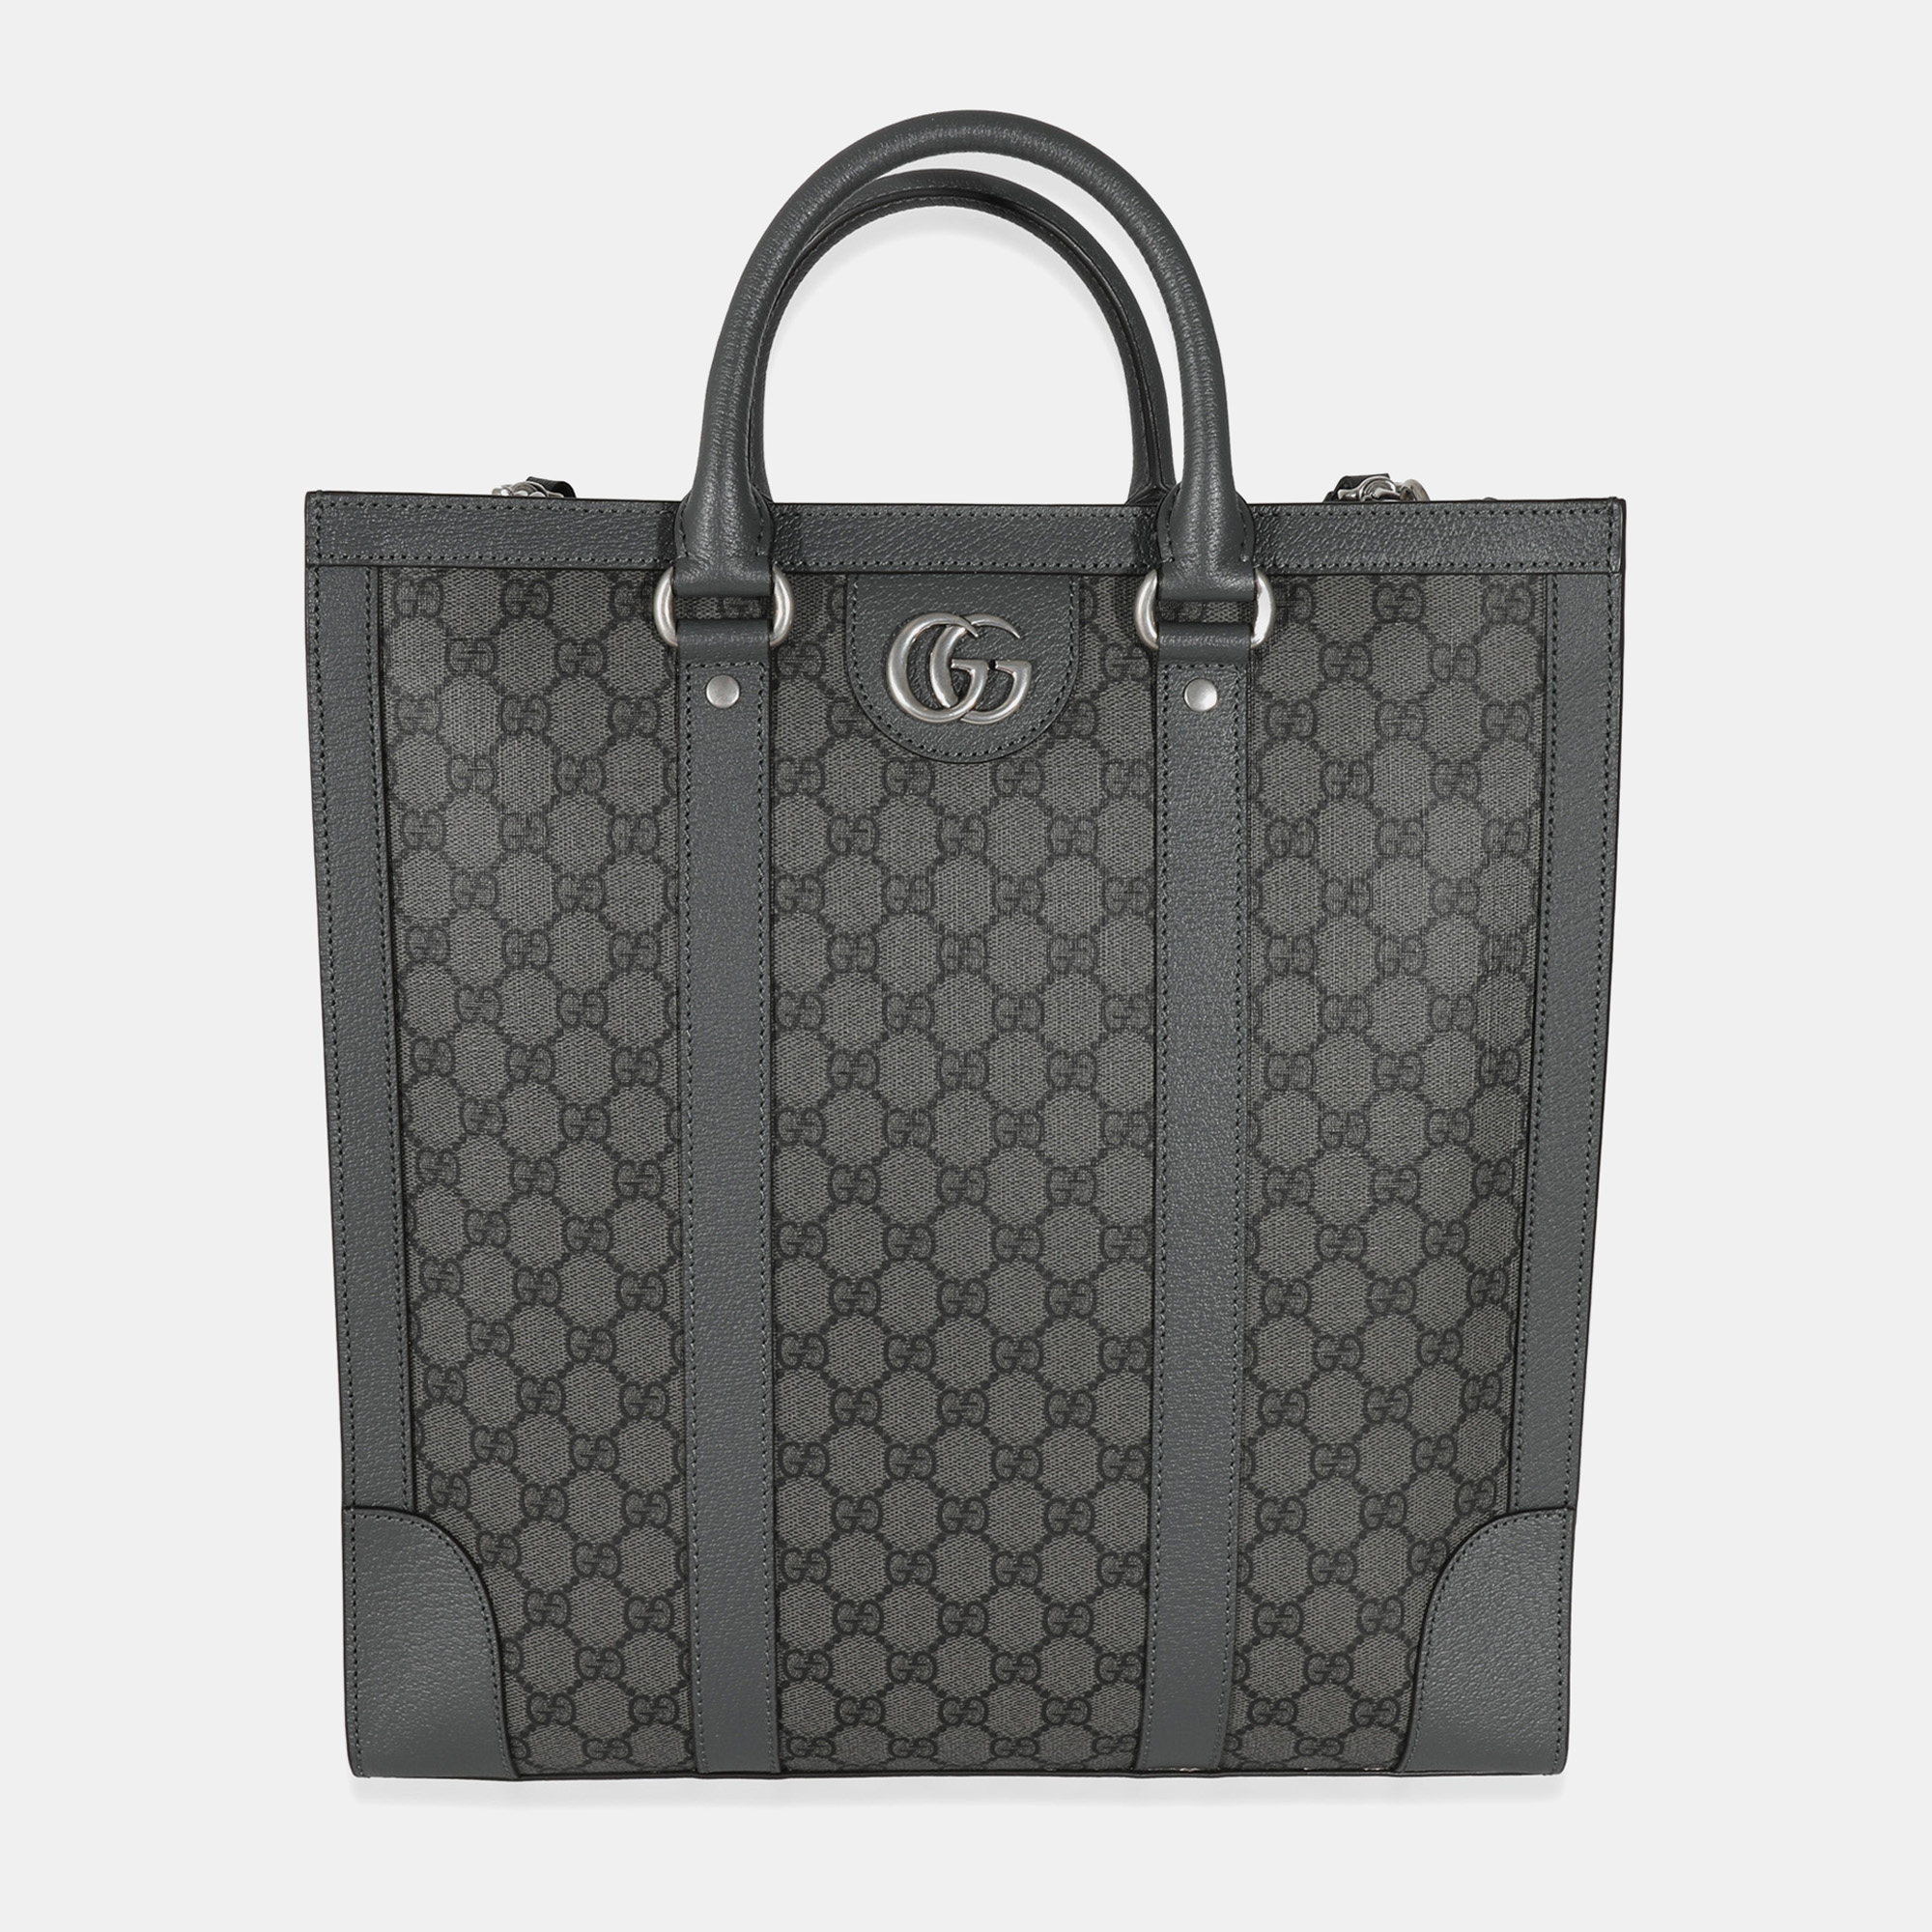 Gucci grey gg supreme canvas large ophidia tote bag